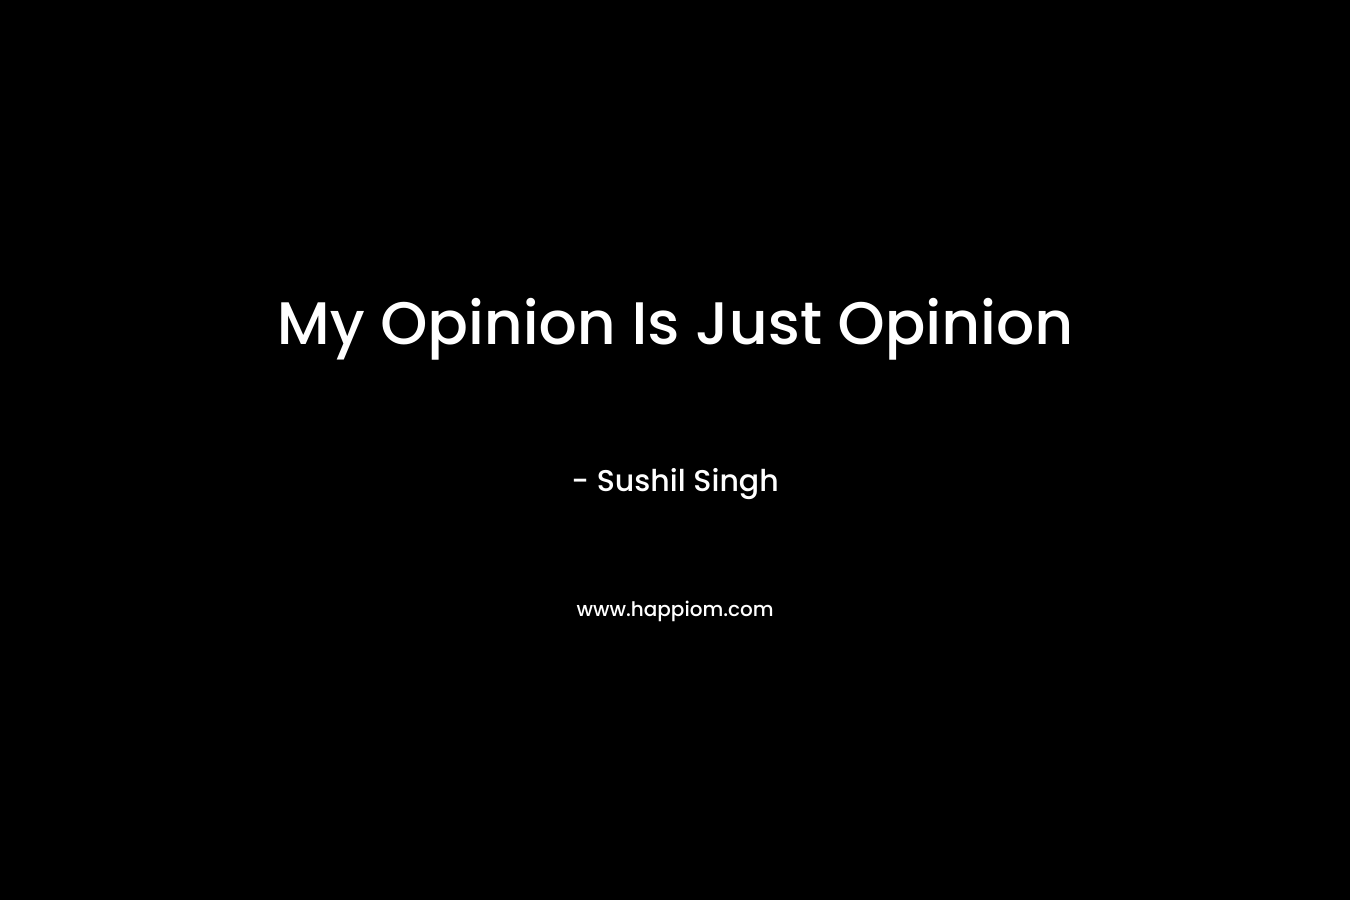 My Opinion Is Just Opinion